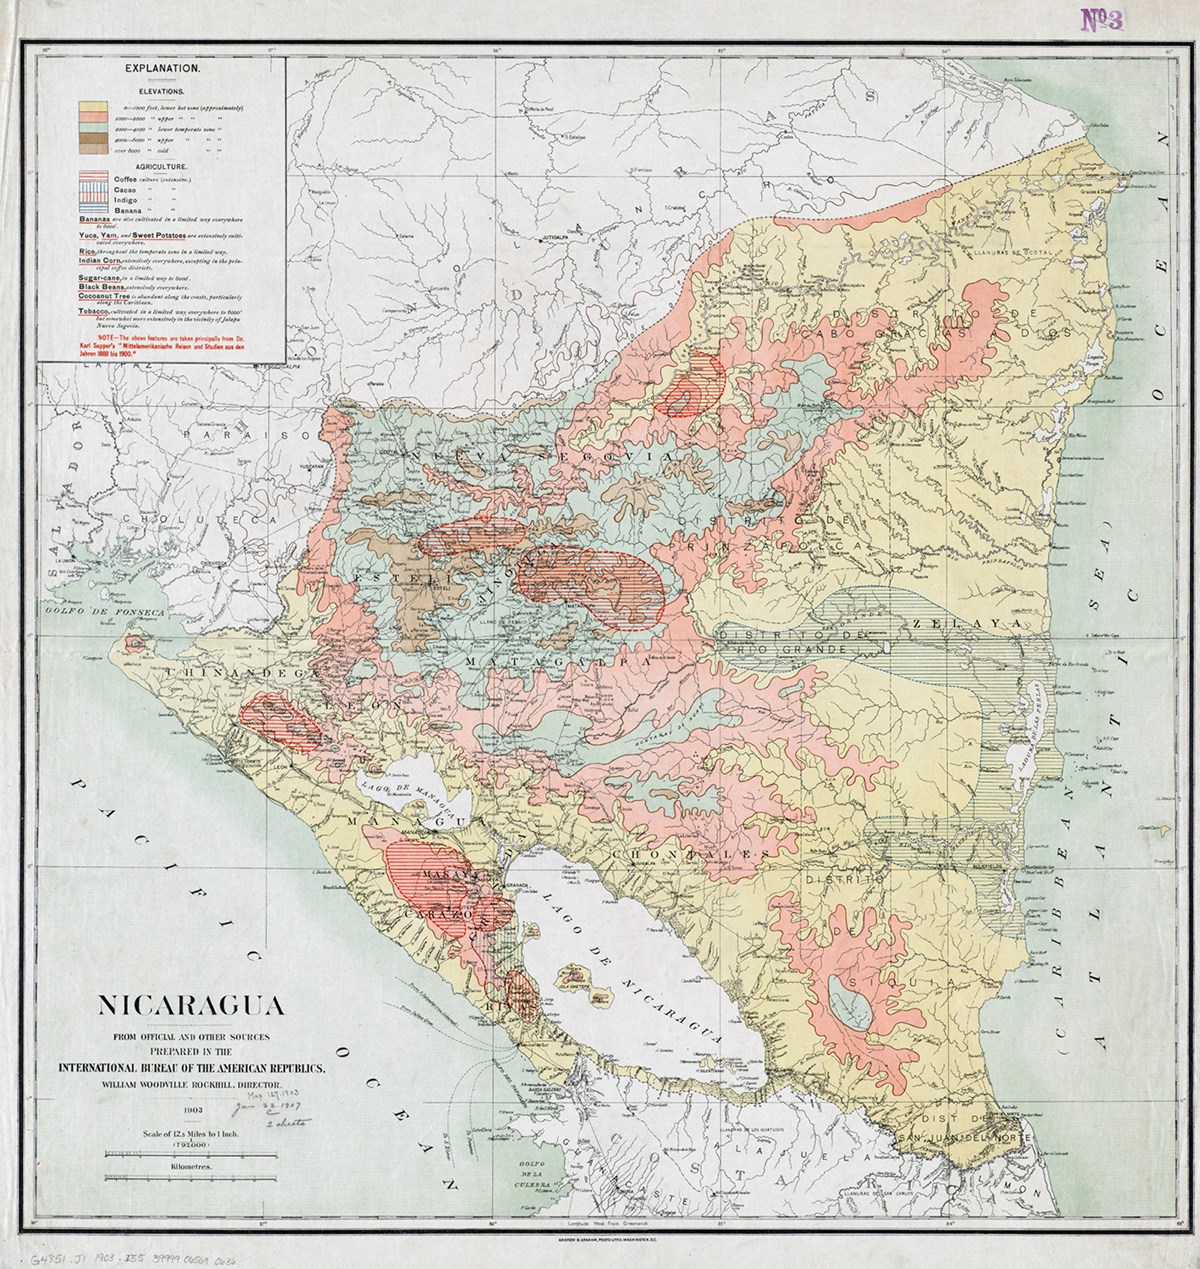 “Nicaragua” by Norman B. Leventhal Map Center is licensed under CC BY 2.0